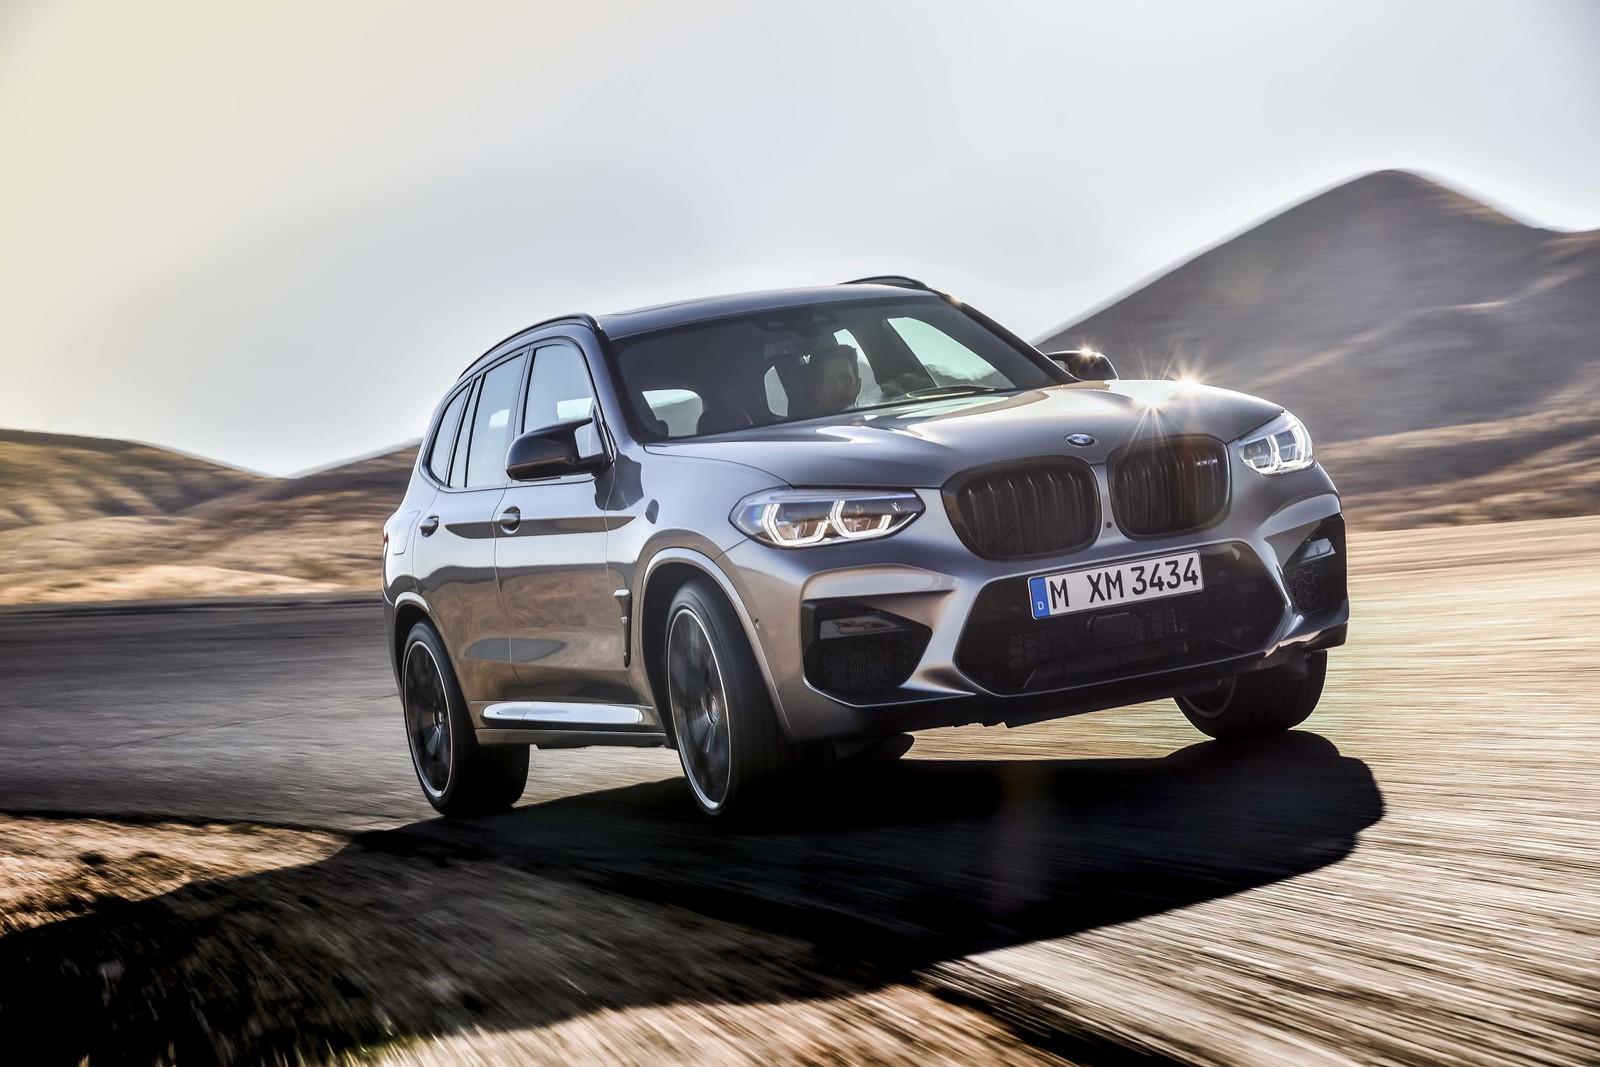 BMW X3 M Picture, Photo, Wallpaper And Videos